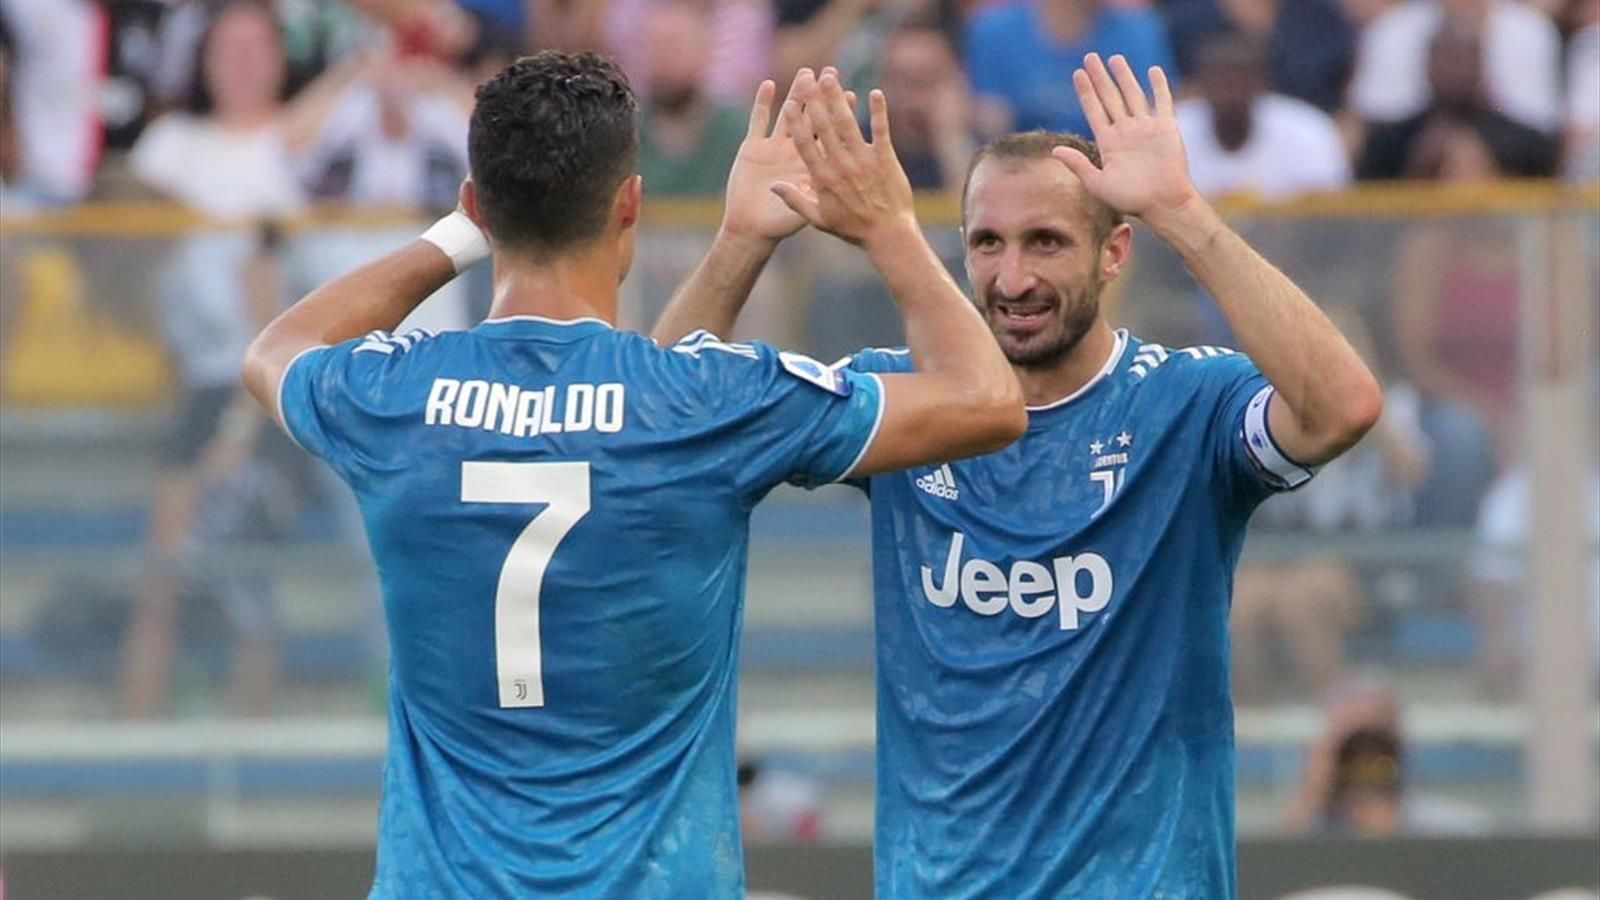 Chiellini Likes Ronaldo More as a Teammate Than as an Opponent